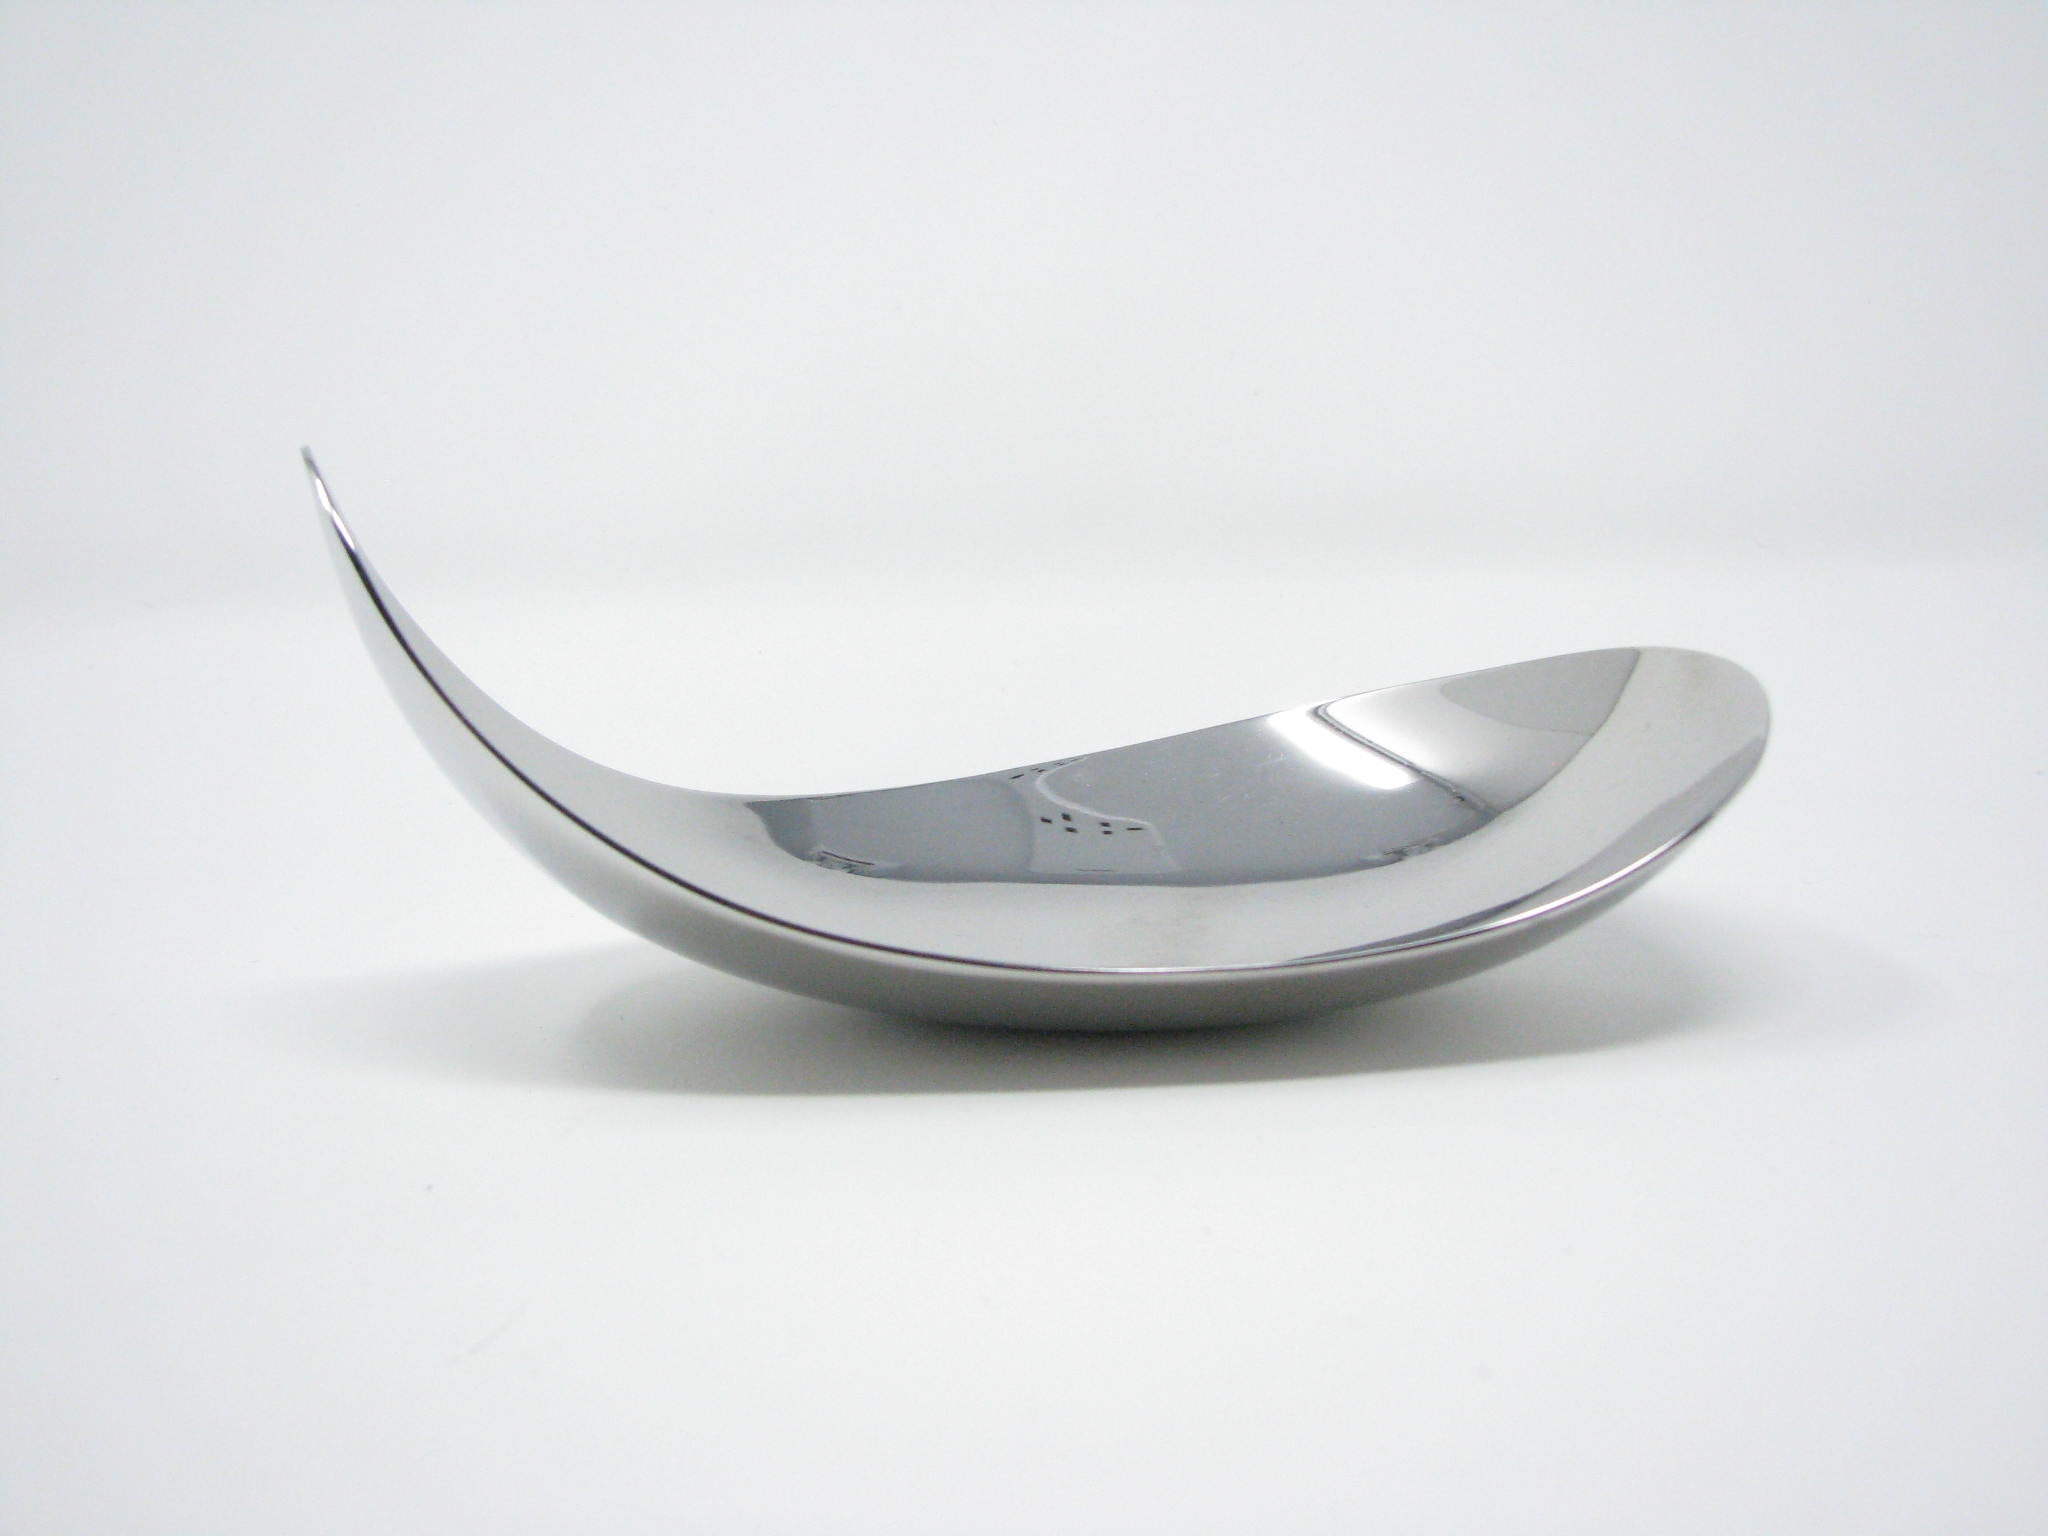 edgebrookhouse - Georg Jensen Bloom Collection Leaf Small Organic Shaped Silver Trinket / Candy Dish